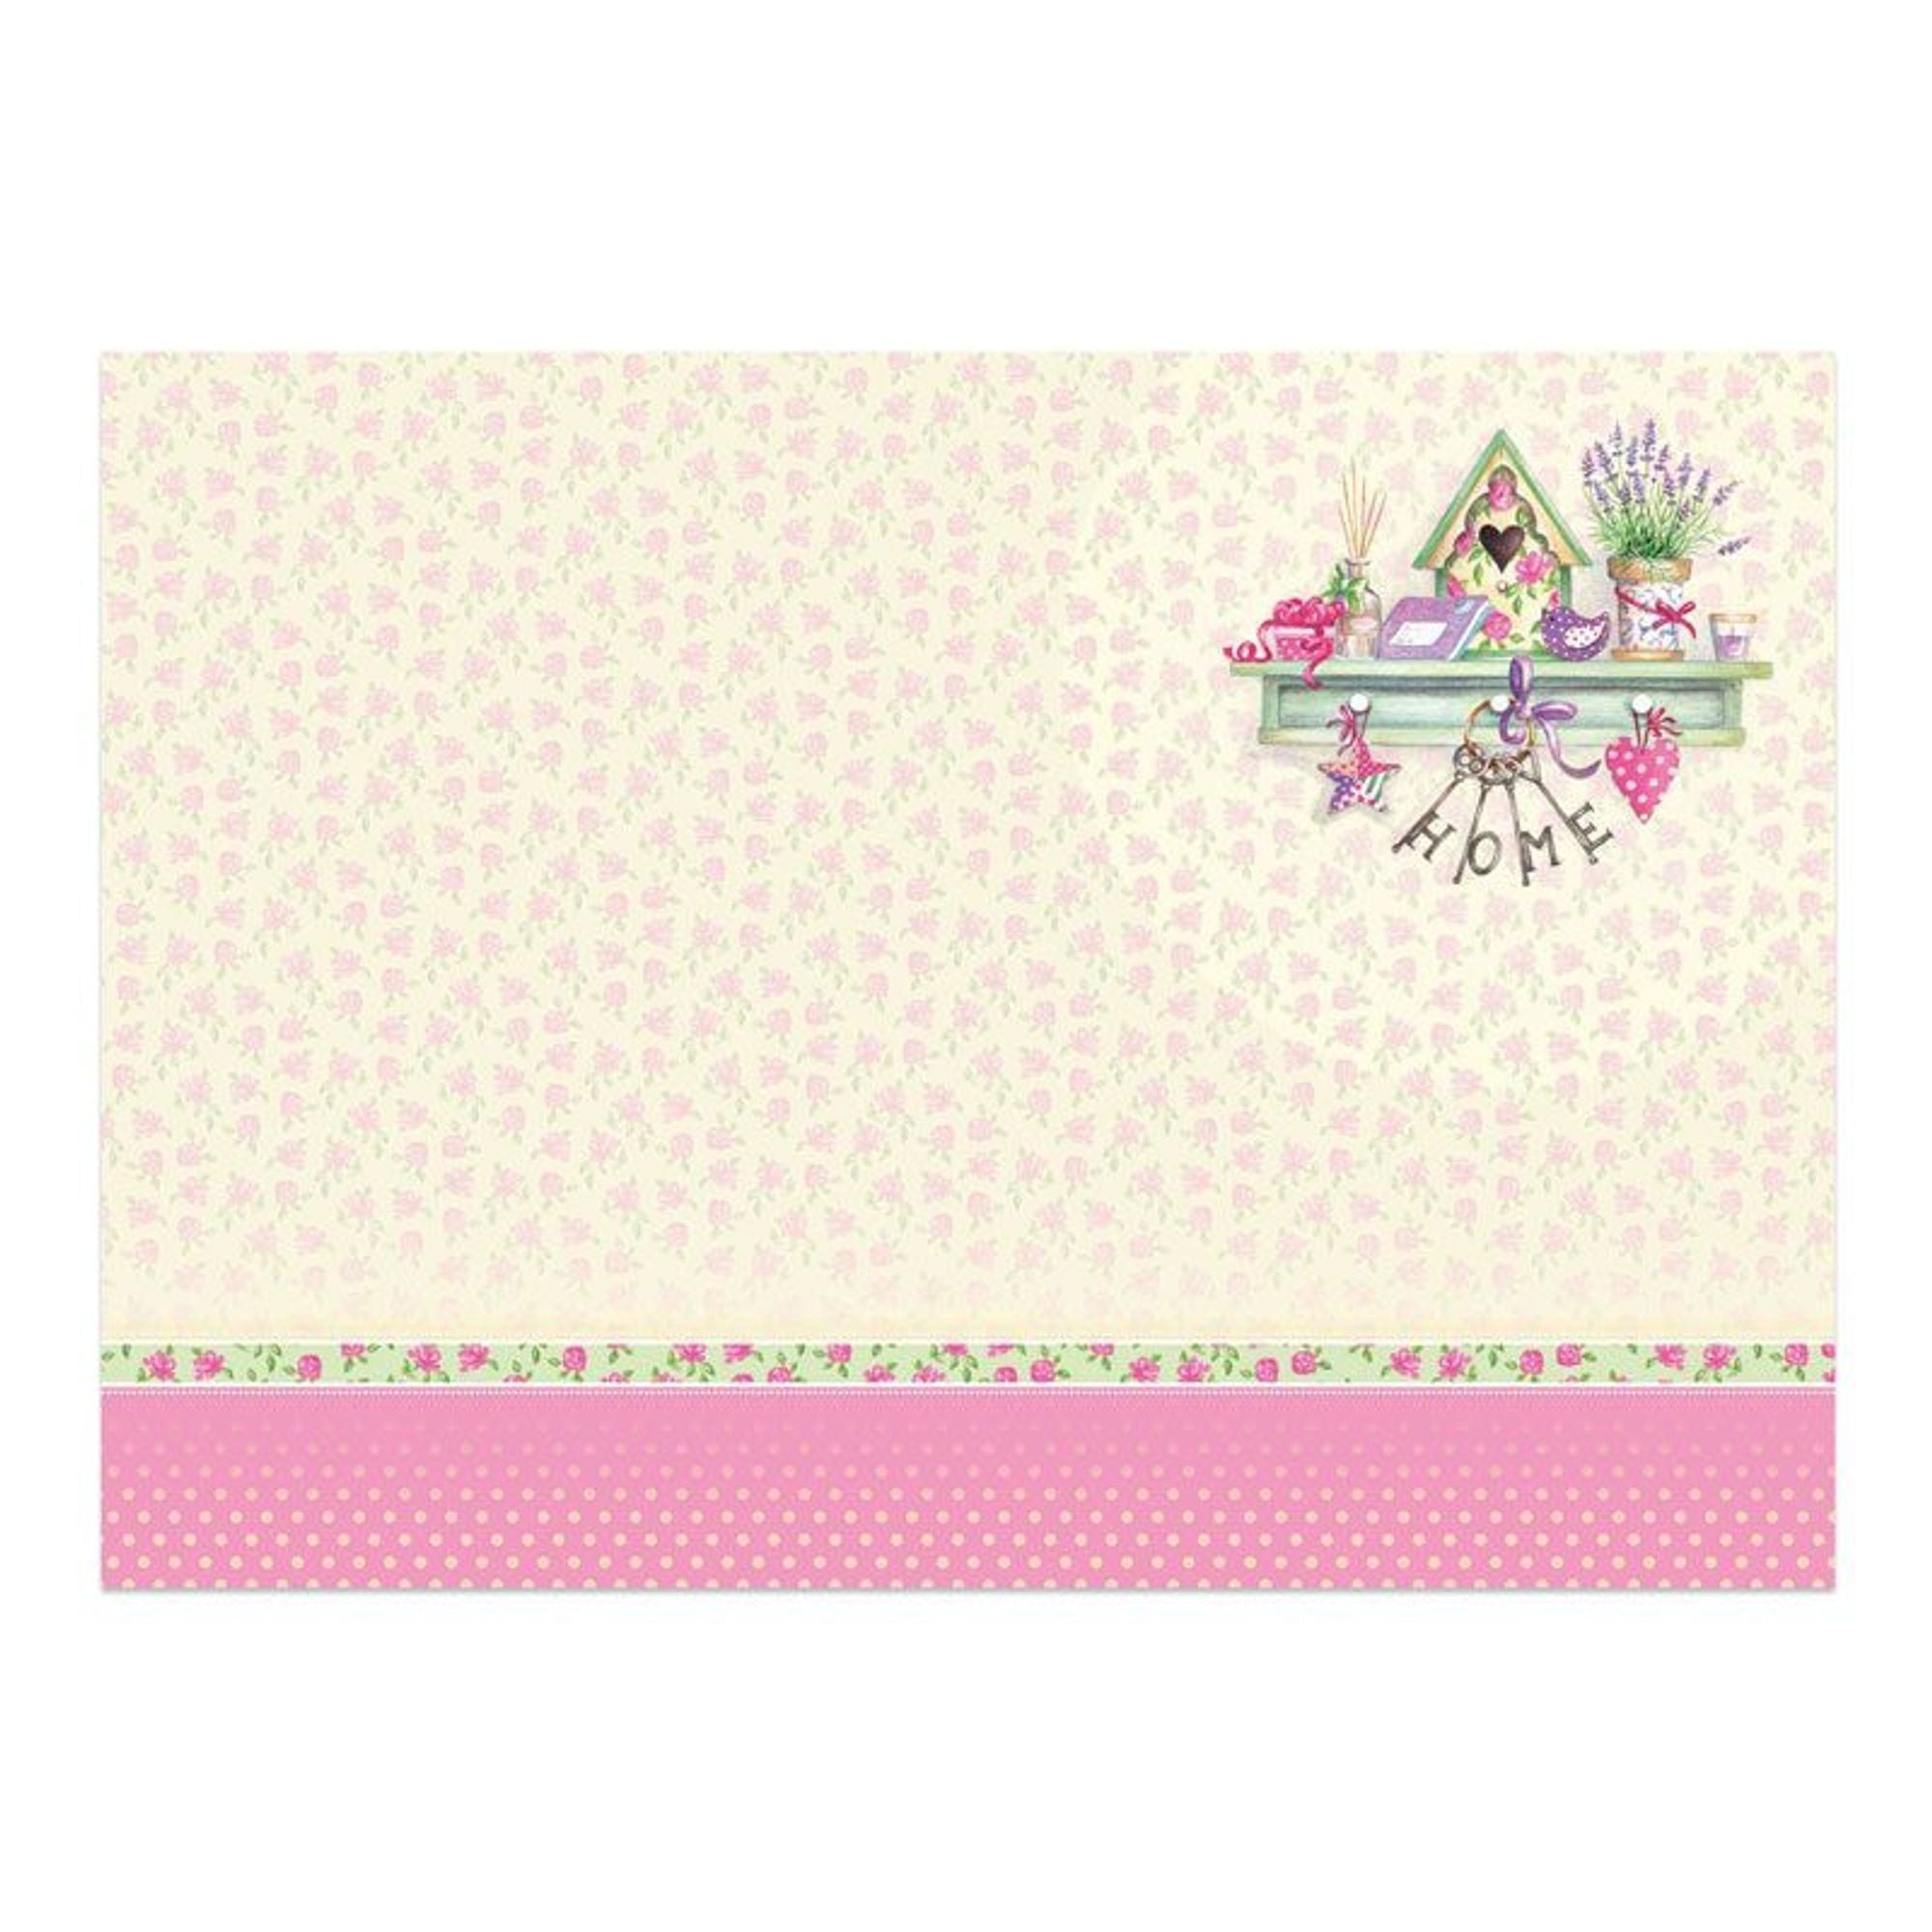 Springtime WIshes Deco-Large - Welcome Home